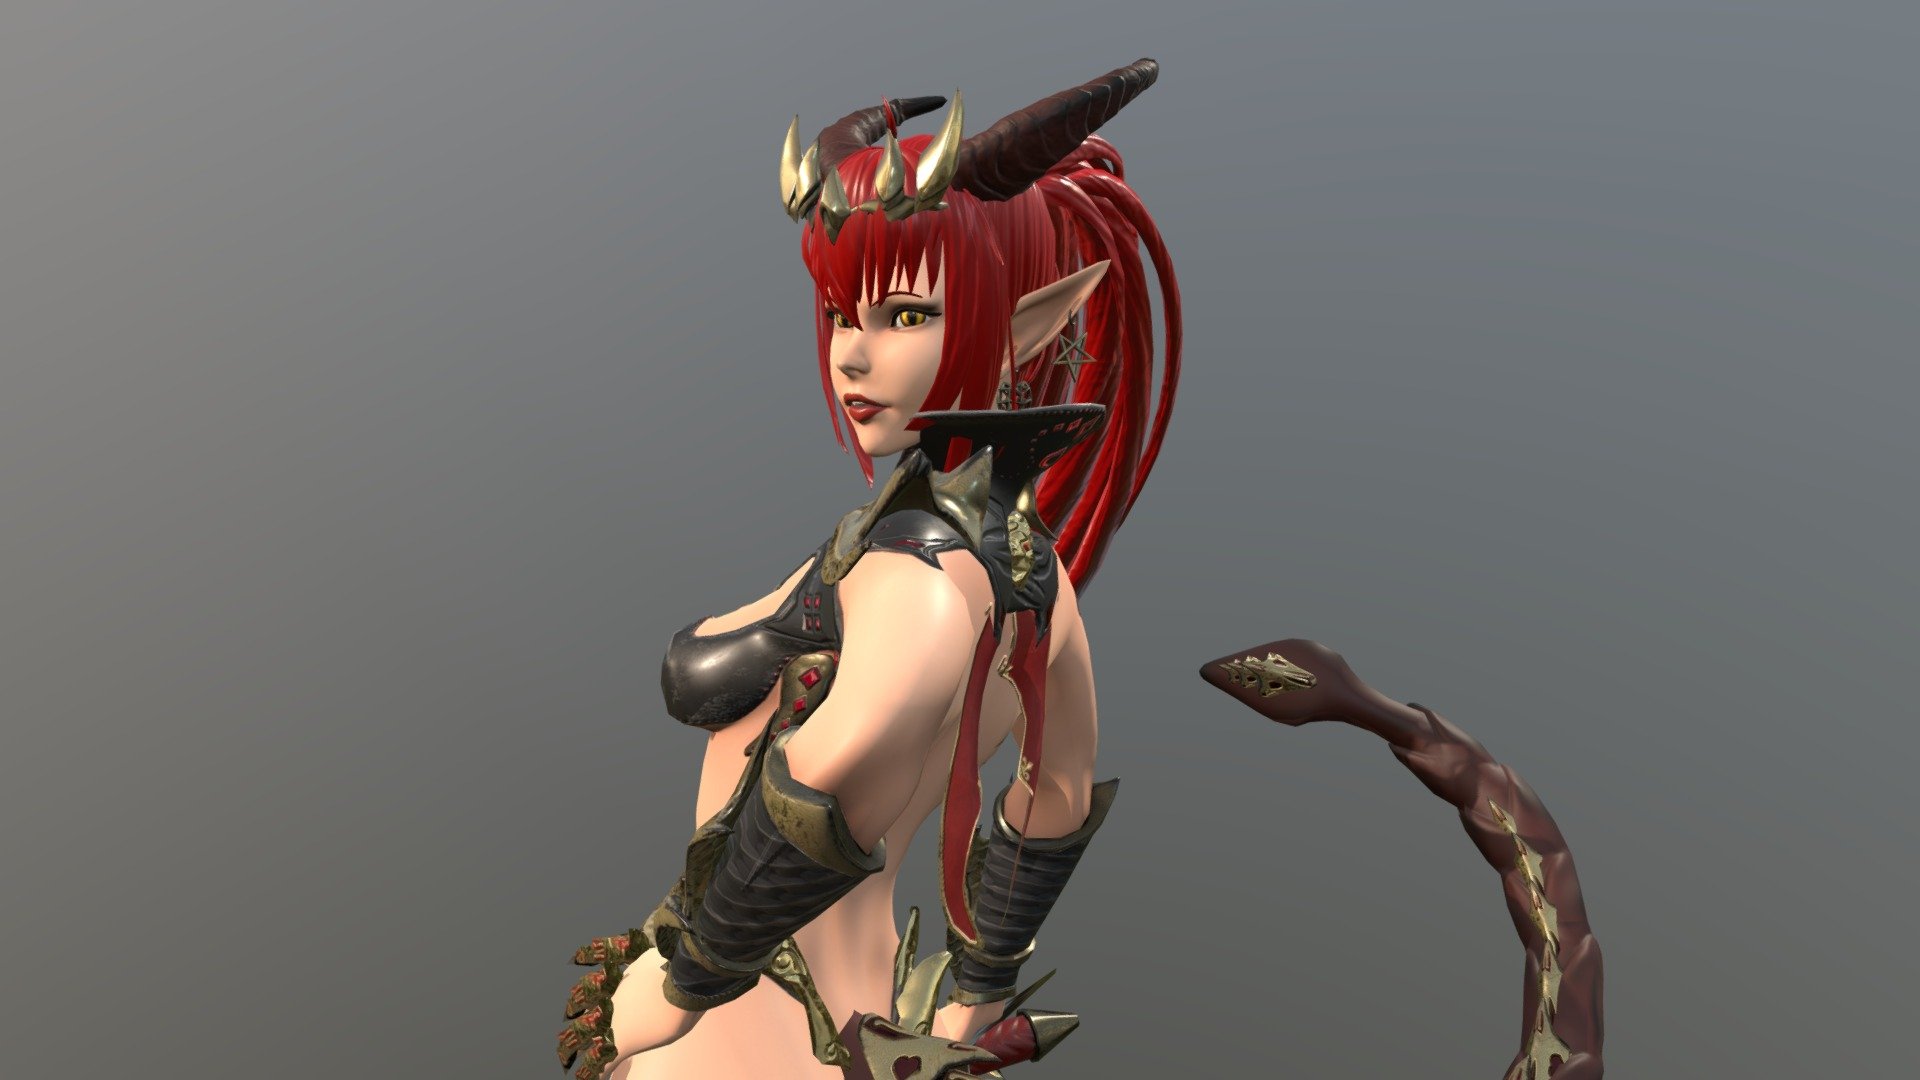 model is available here - https://linktr.ee/Elsianne - Succubus - 3D model by Lorra (@t3nt4cl3th3r4p12t) 3d model